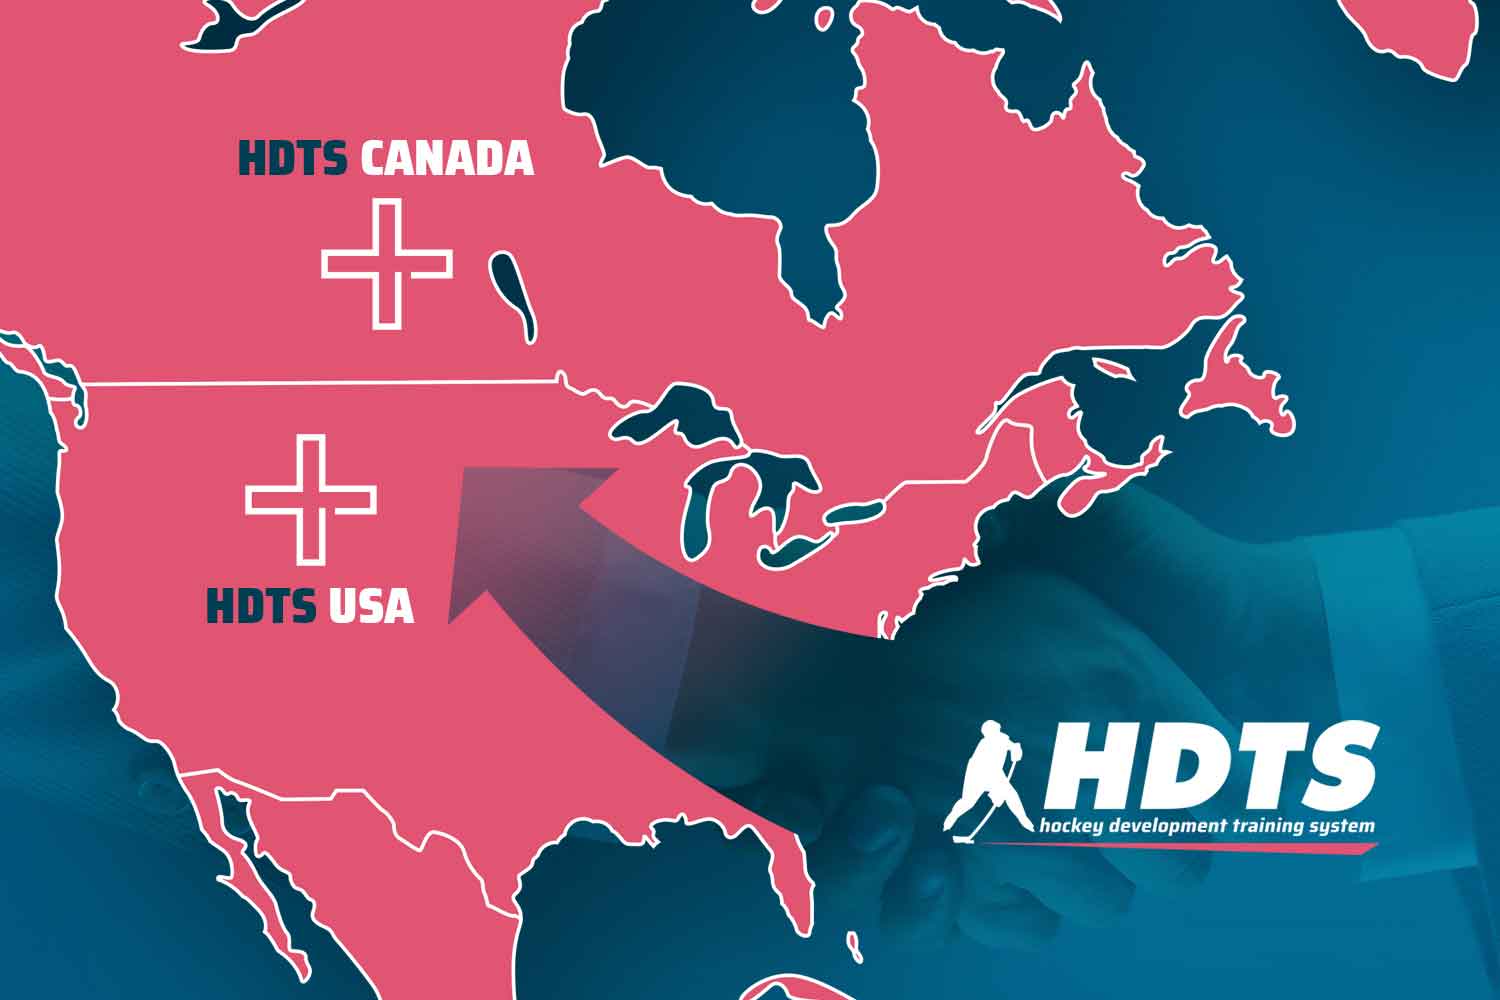 hdts business in canada and usa